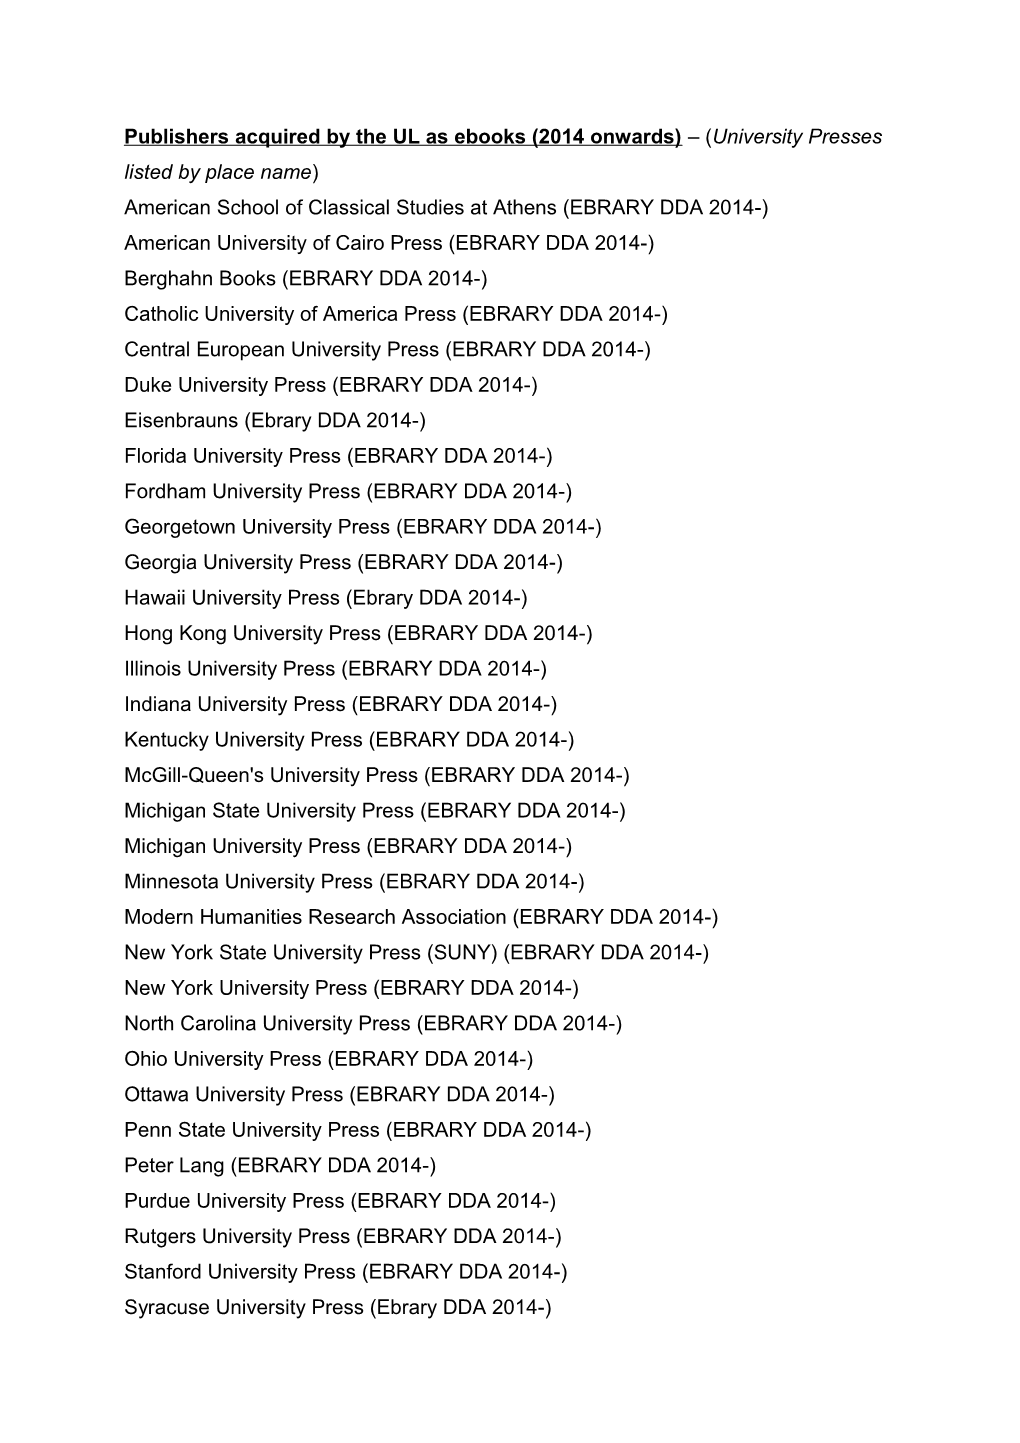 Publishers Acquired by the UL As Ebooks (2014 Onwards) ( University Presses Listed By